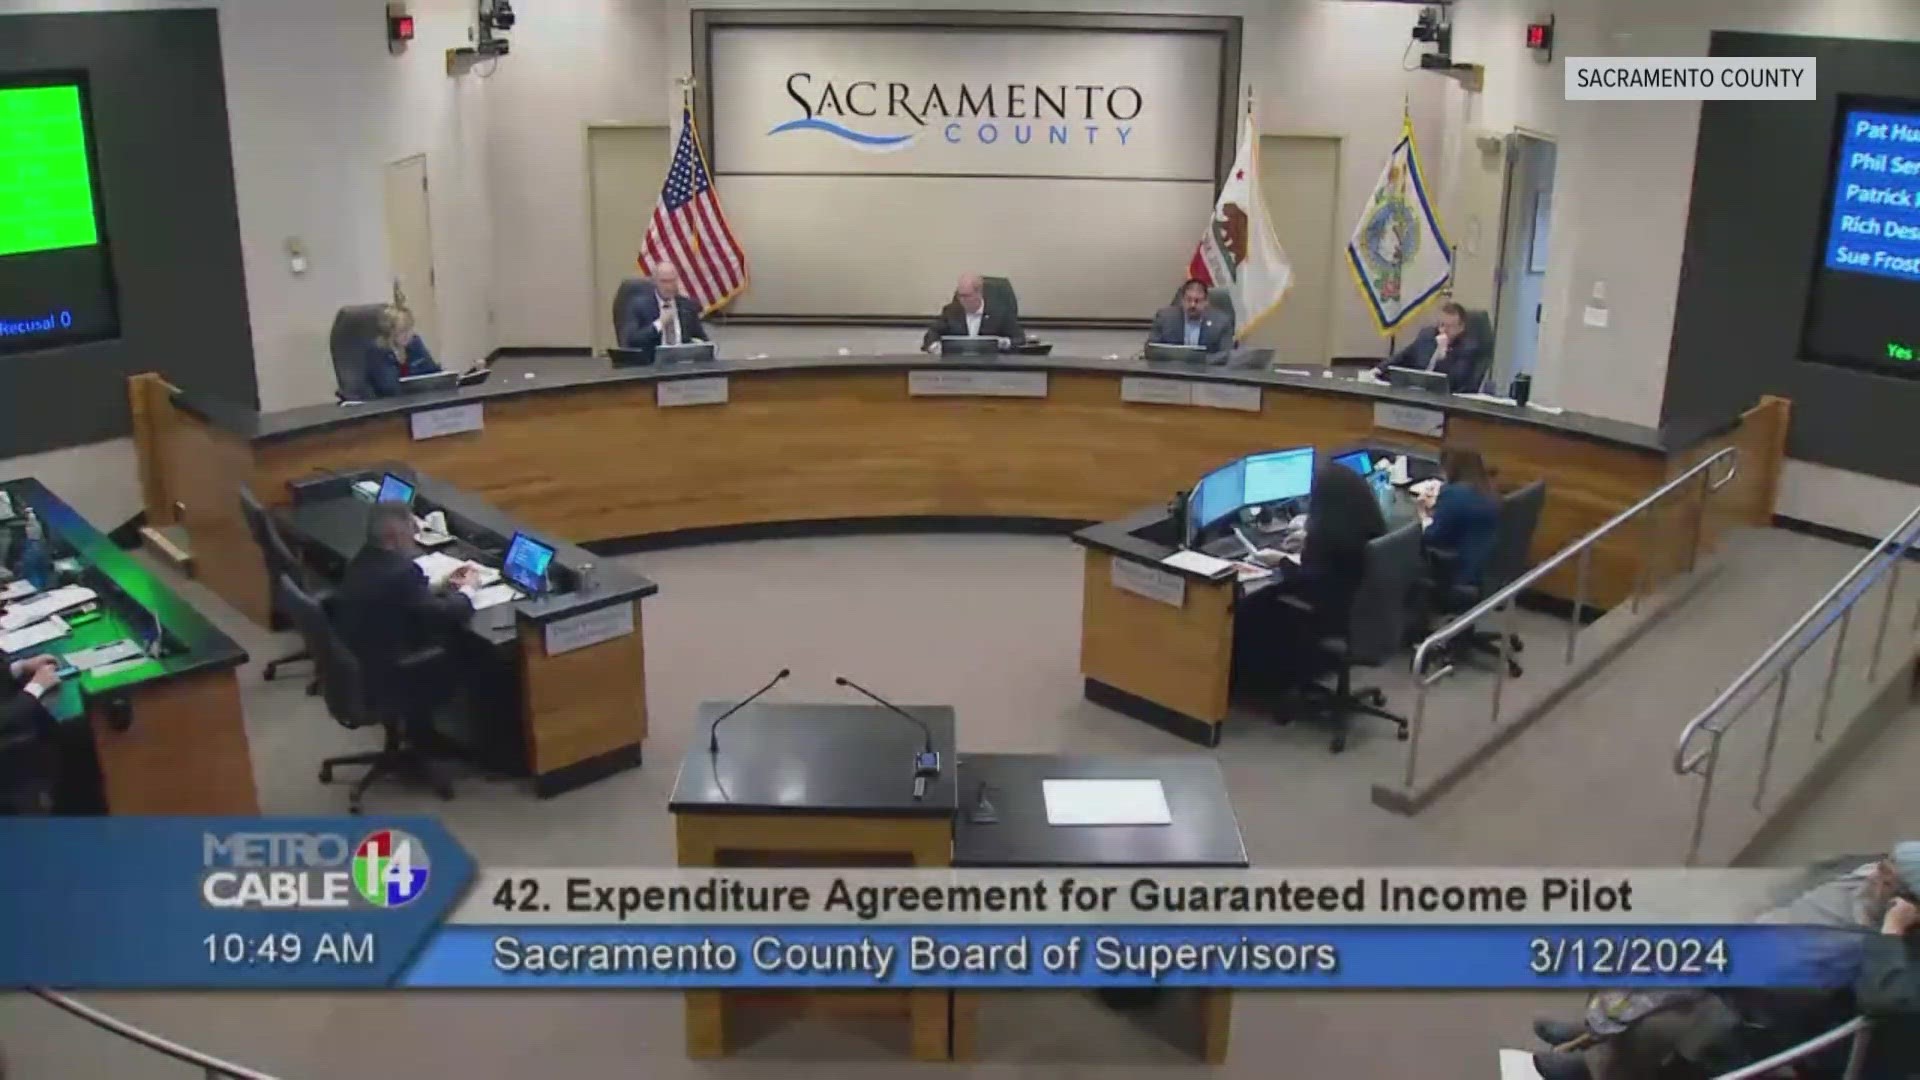 Sacramento County is preparing to launch a guaranteed income pilot program for low income families.